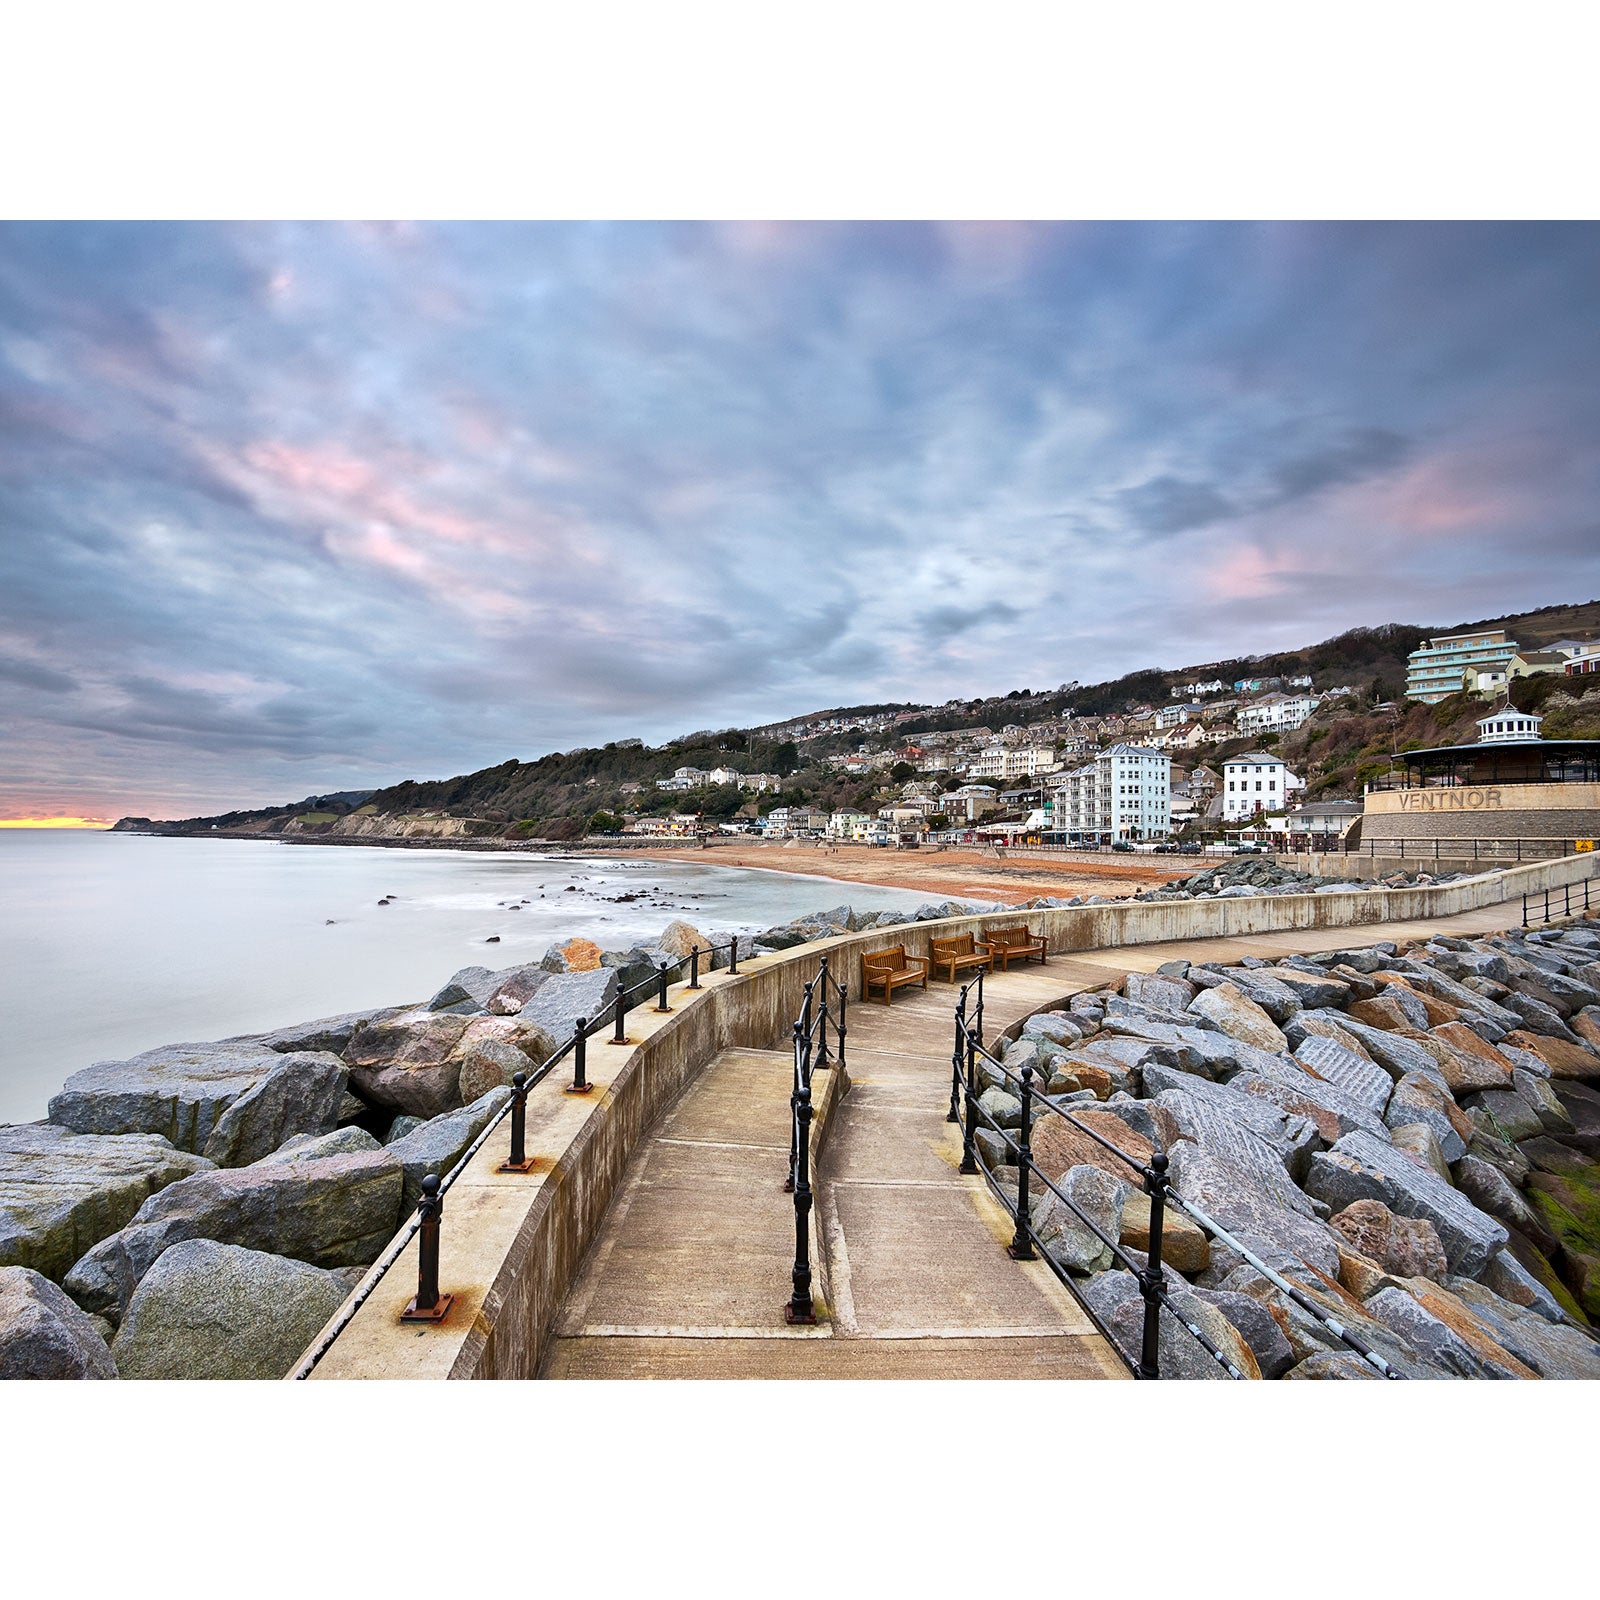 Ventnor - Available Light Photography